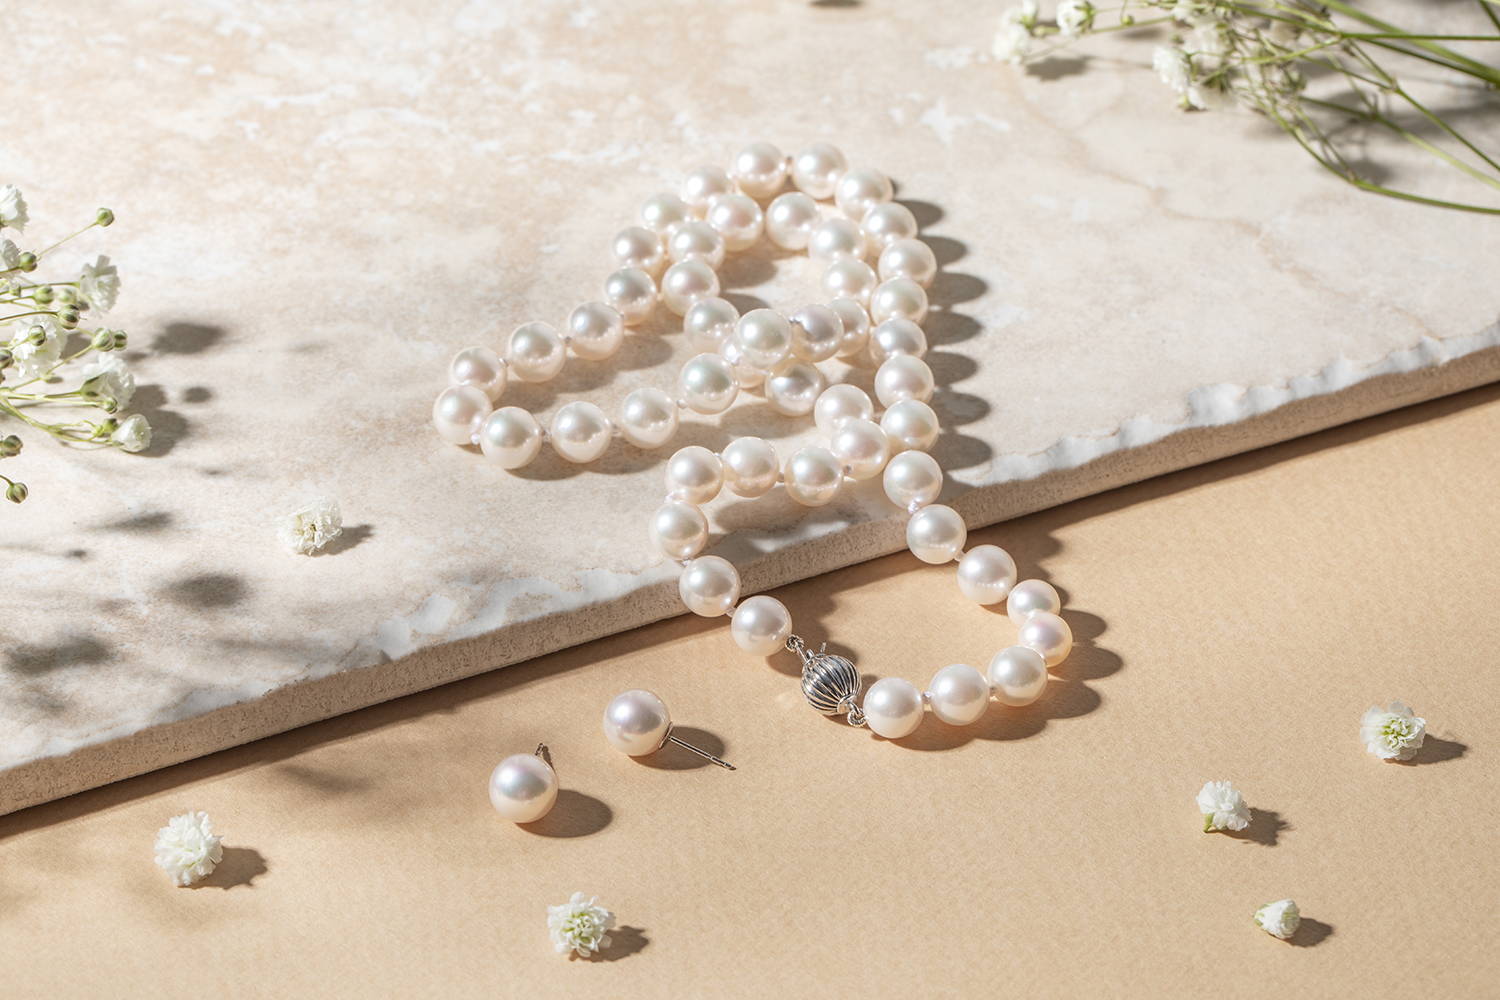 White Pearl Necklace and Earrings with Baby's Breath Flowers